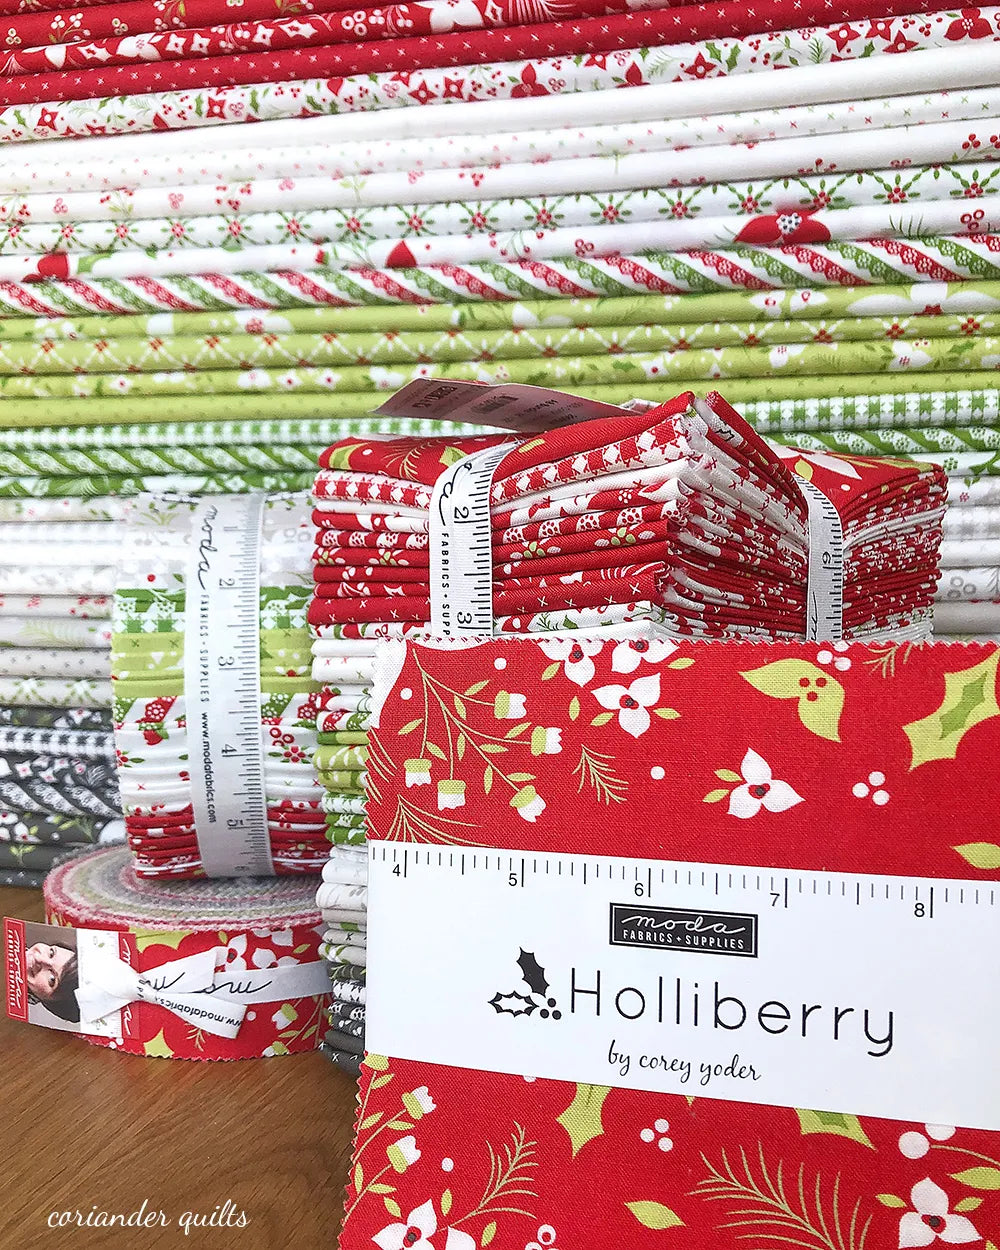 Holliberry by Corey Yoder of Coriander Quilts for Moda